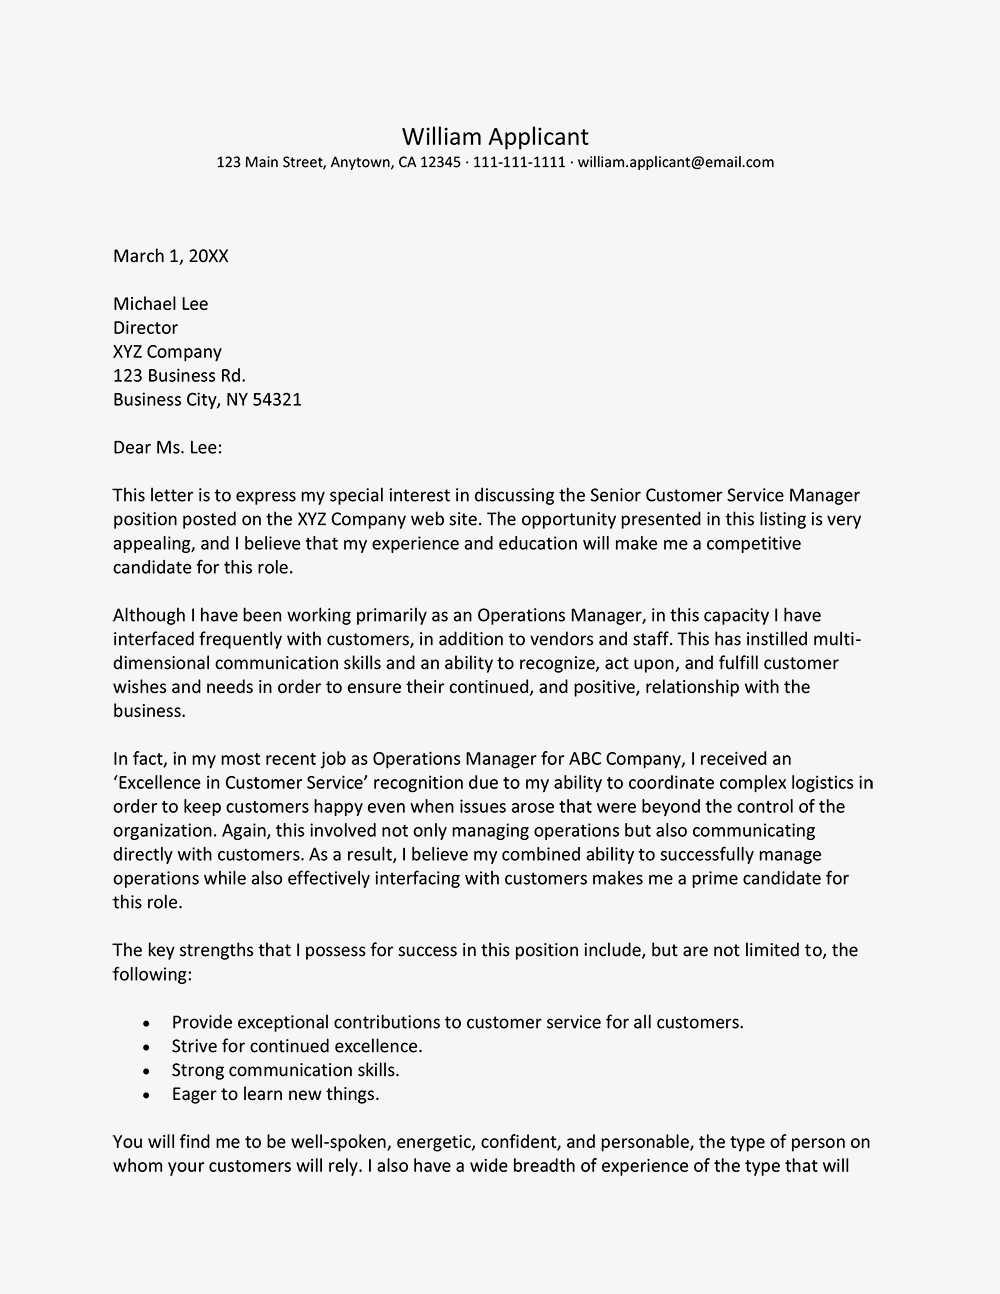 Transferable Skills Cover Letter Debandje throughout sizing 1000 X 1294